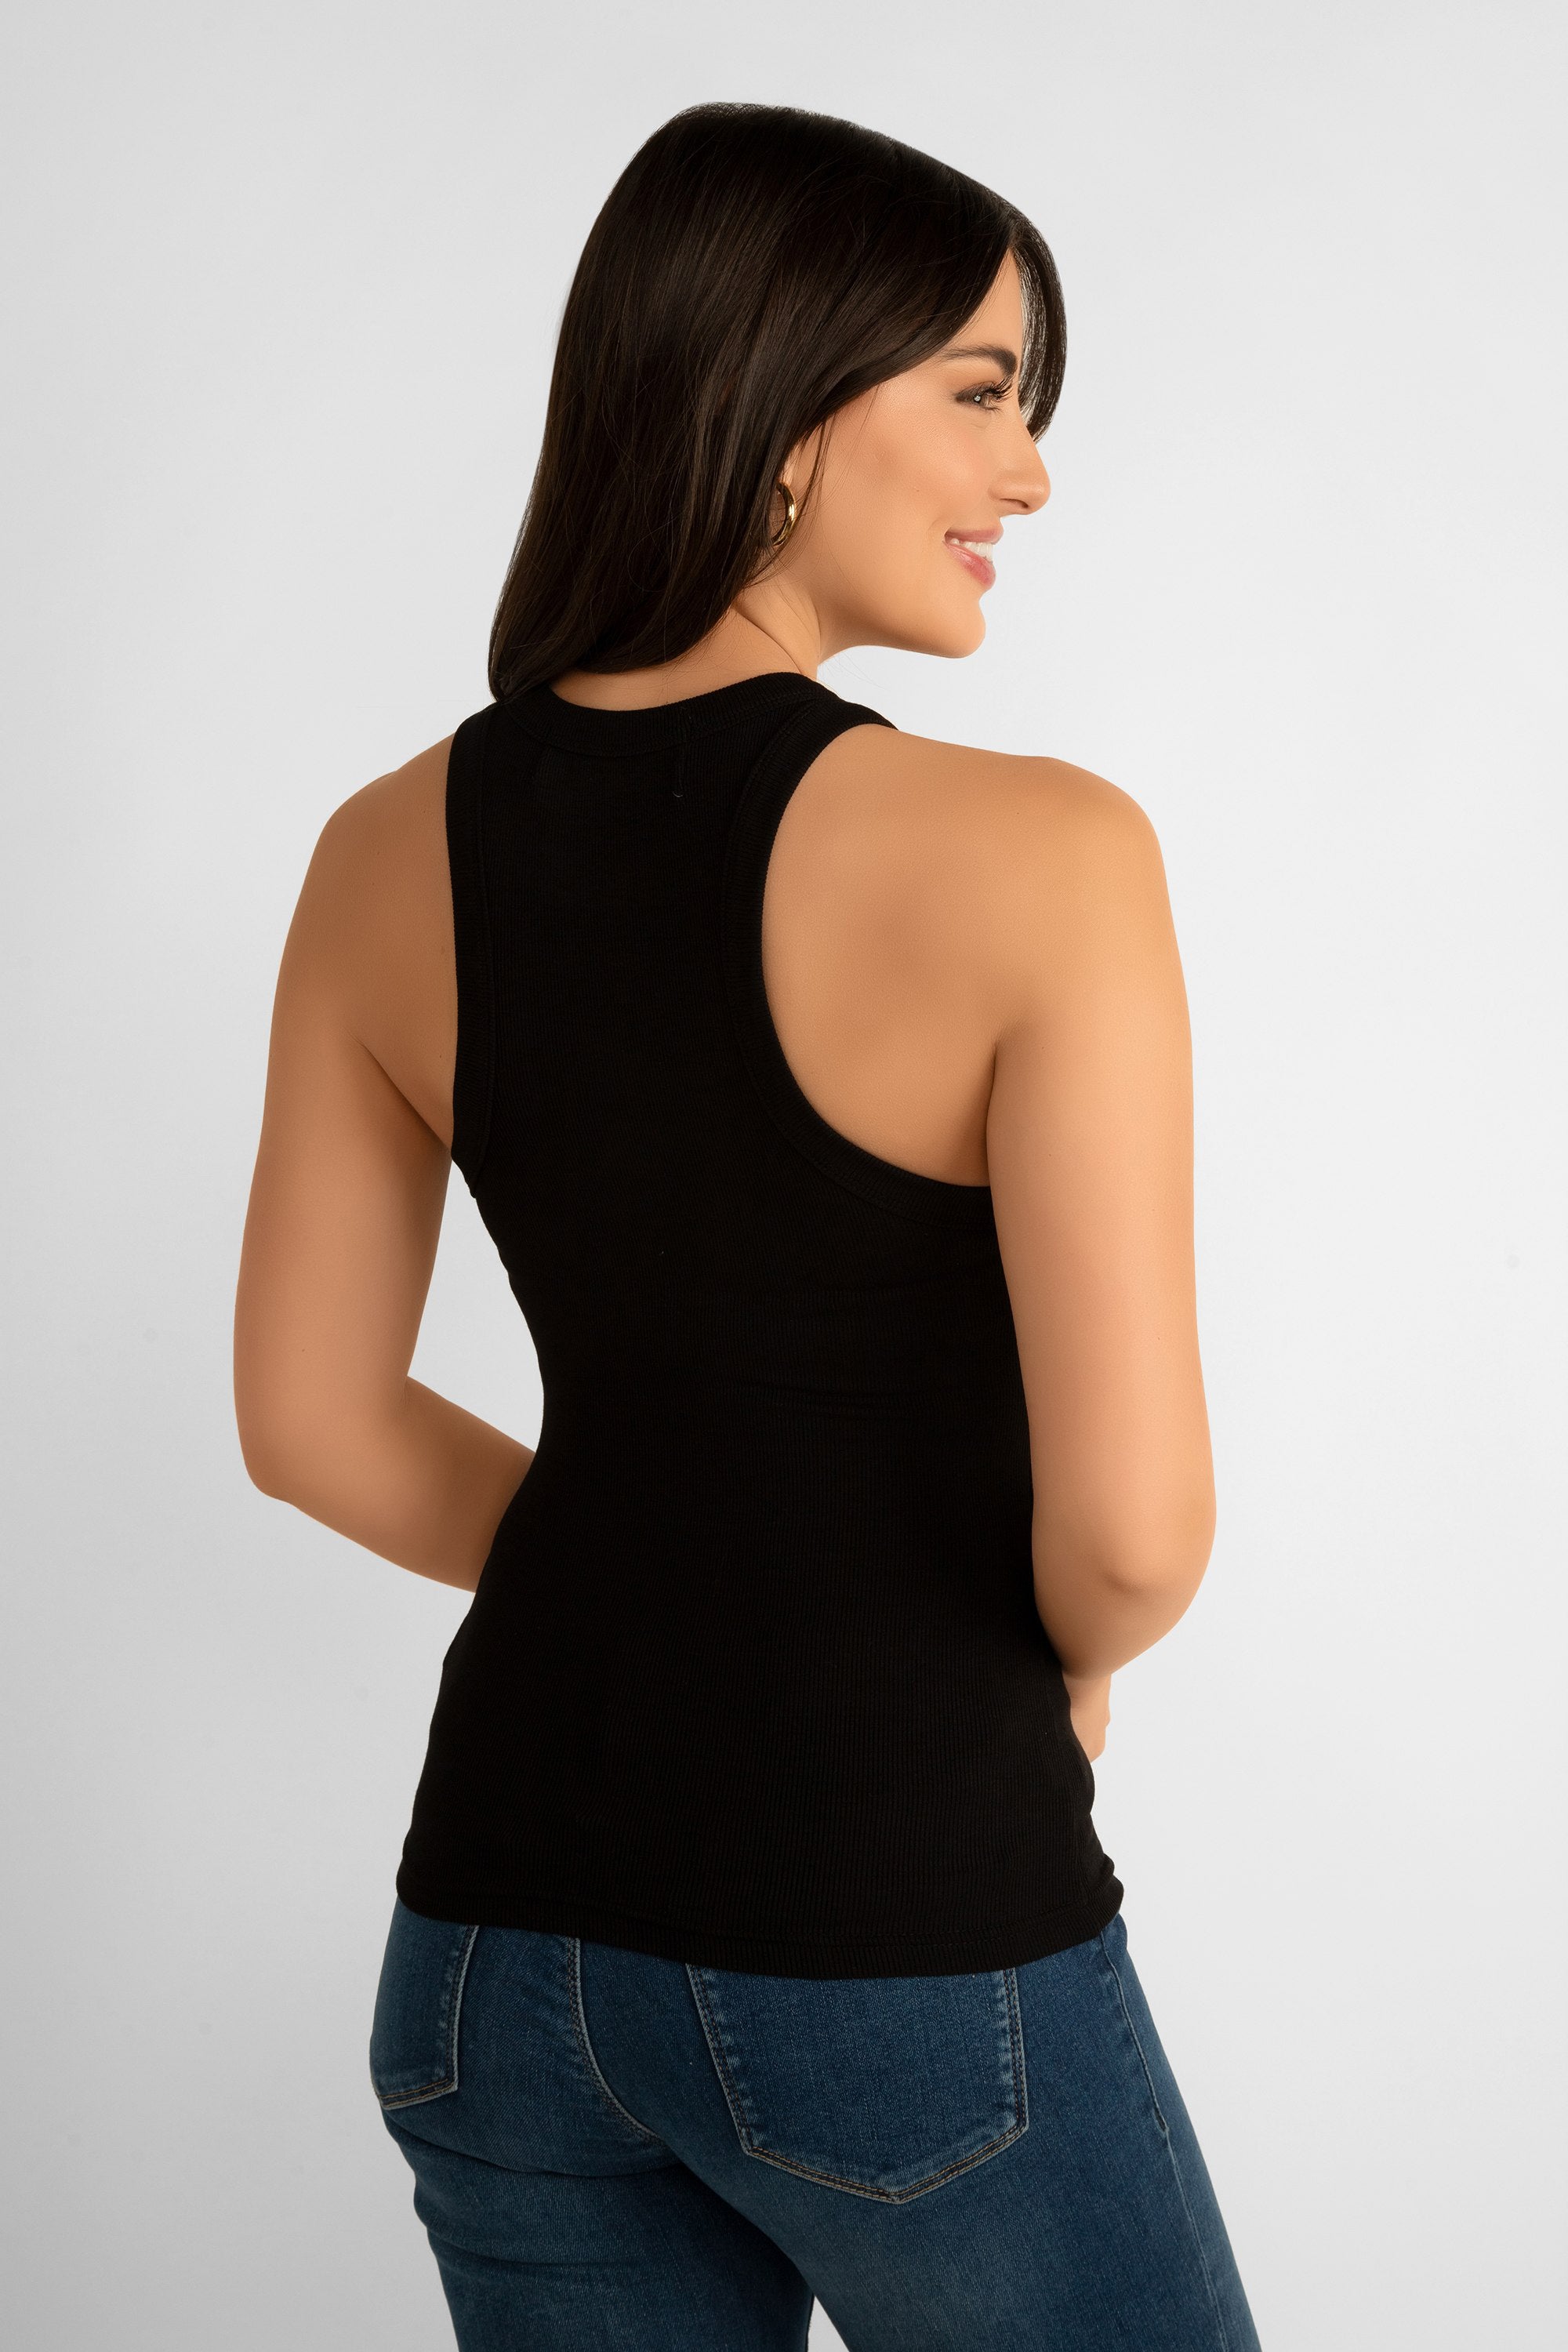 Back view of Pink Martini (TO-679542) The Danika Top - Women's Classic Ribbed Knit, Racerback Tank Top in Black